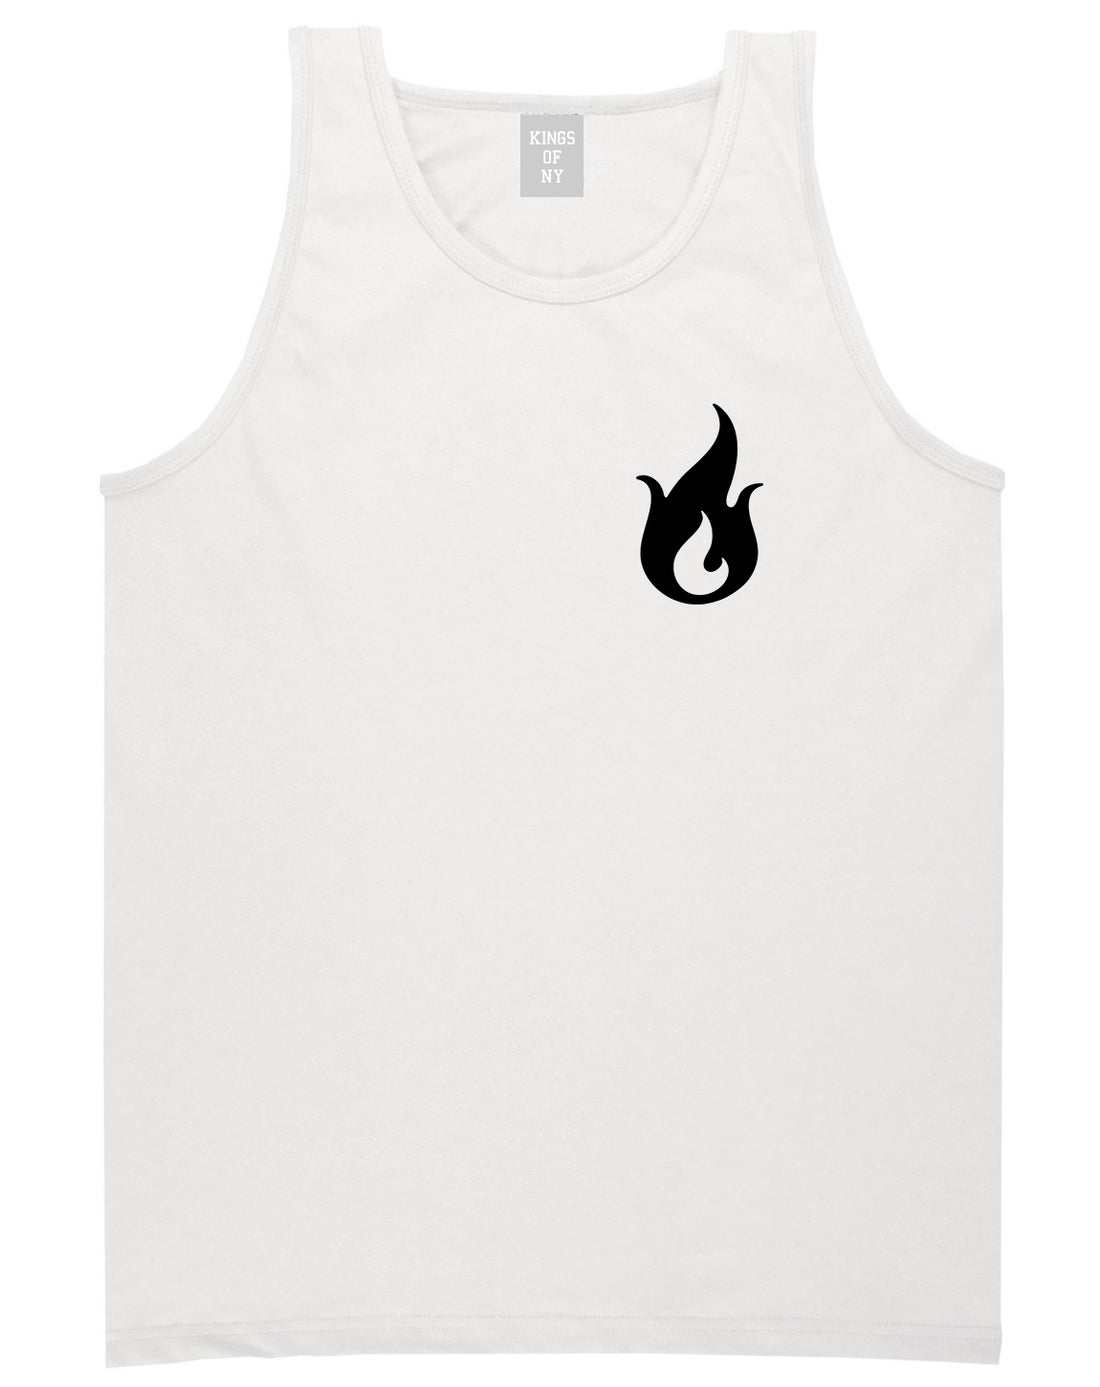 Fire Emoji Chest Mens White Tank Top Shirt by KINGS OF NY